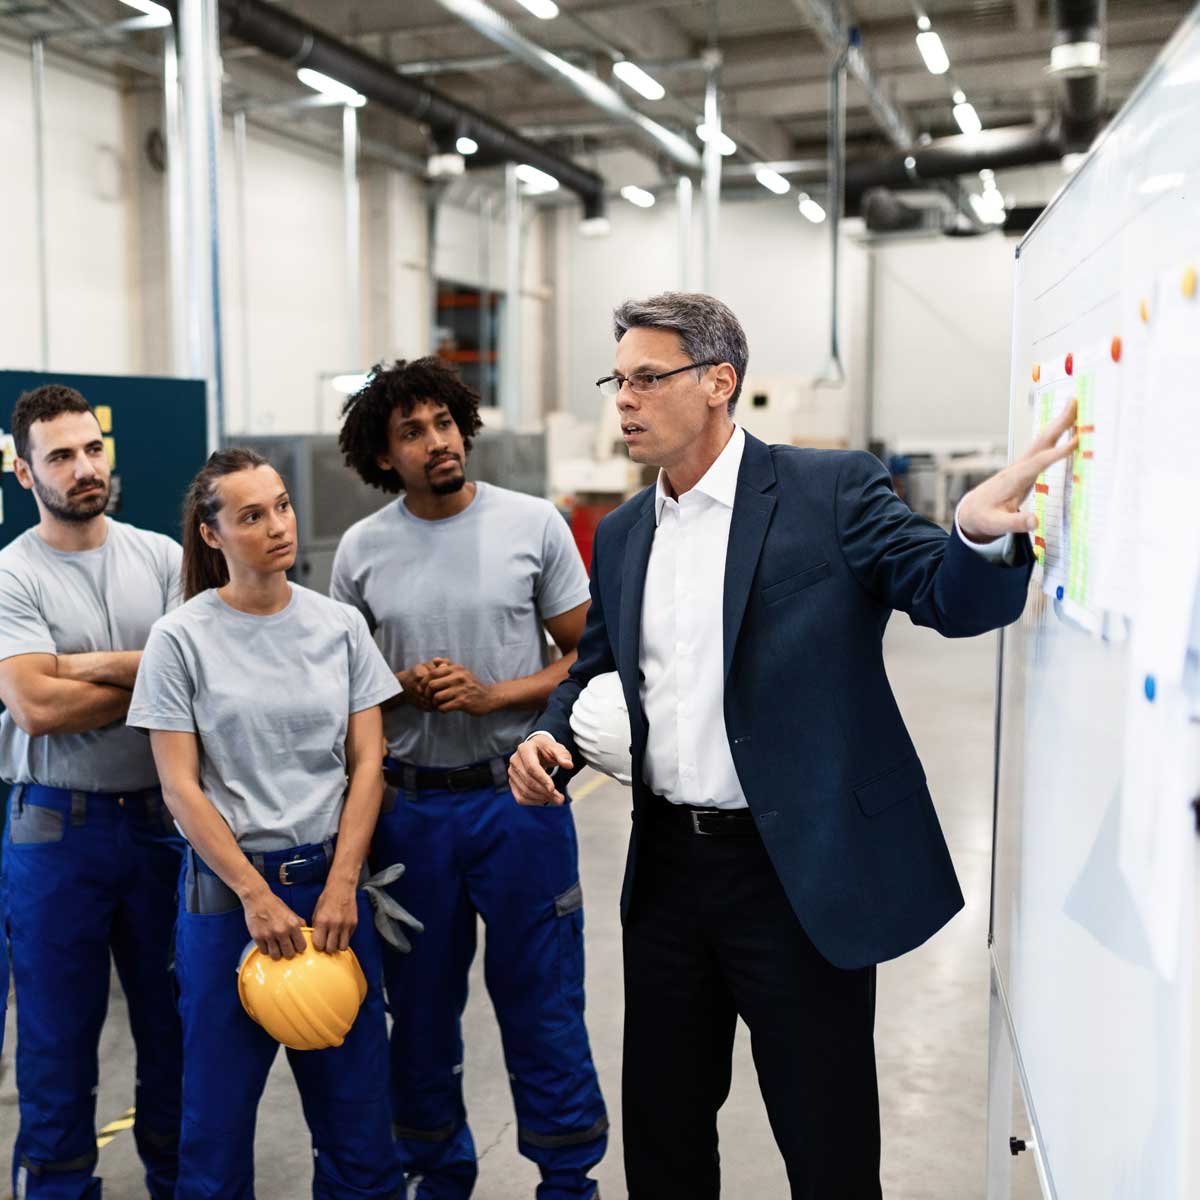 Mature businessman explaining new strategy plans to group of employees in a factory.